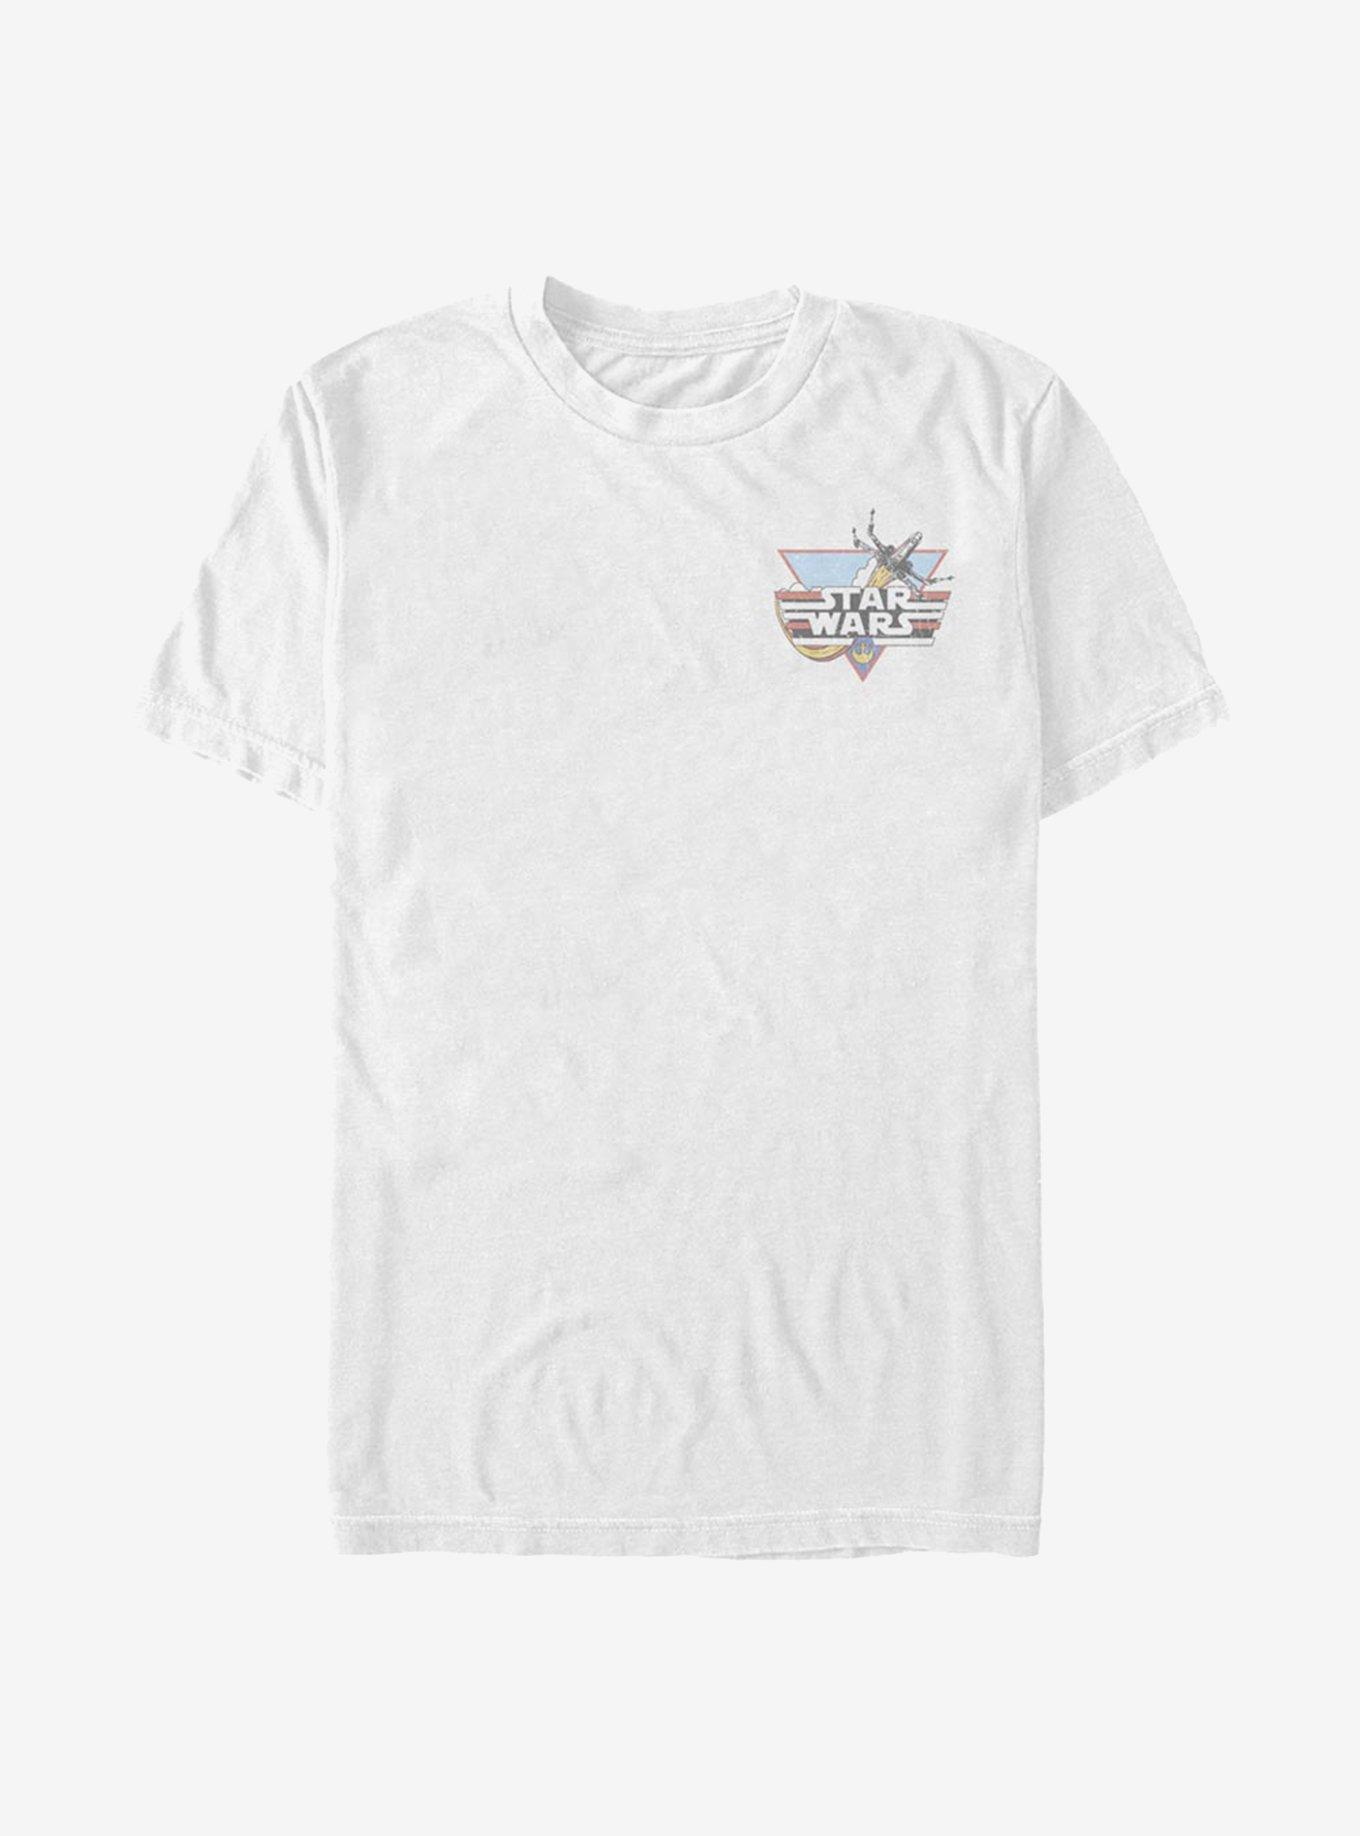 Star Wars X-Wing Flyby T-Shirt, WHITE, hi-res